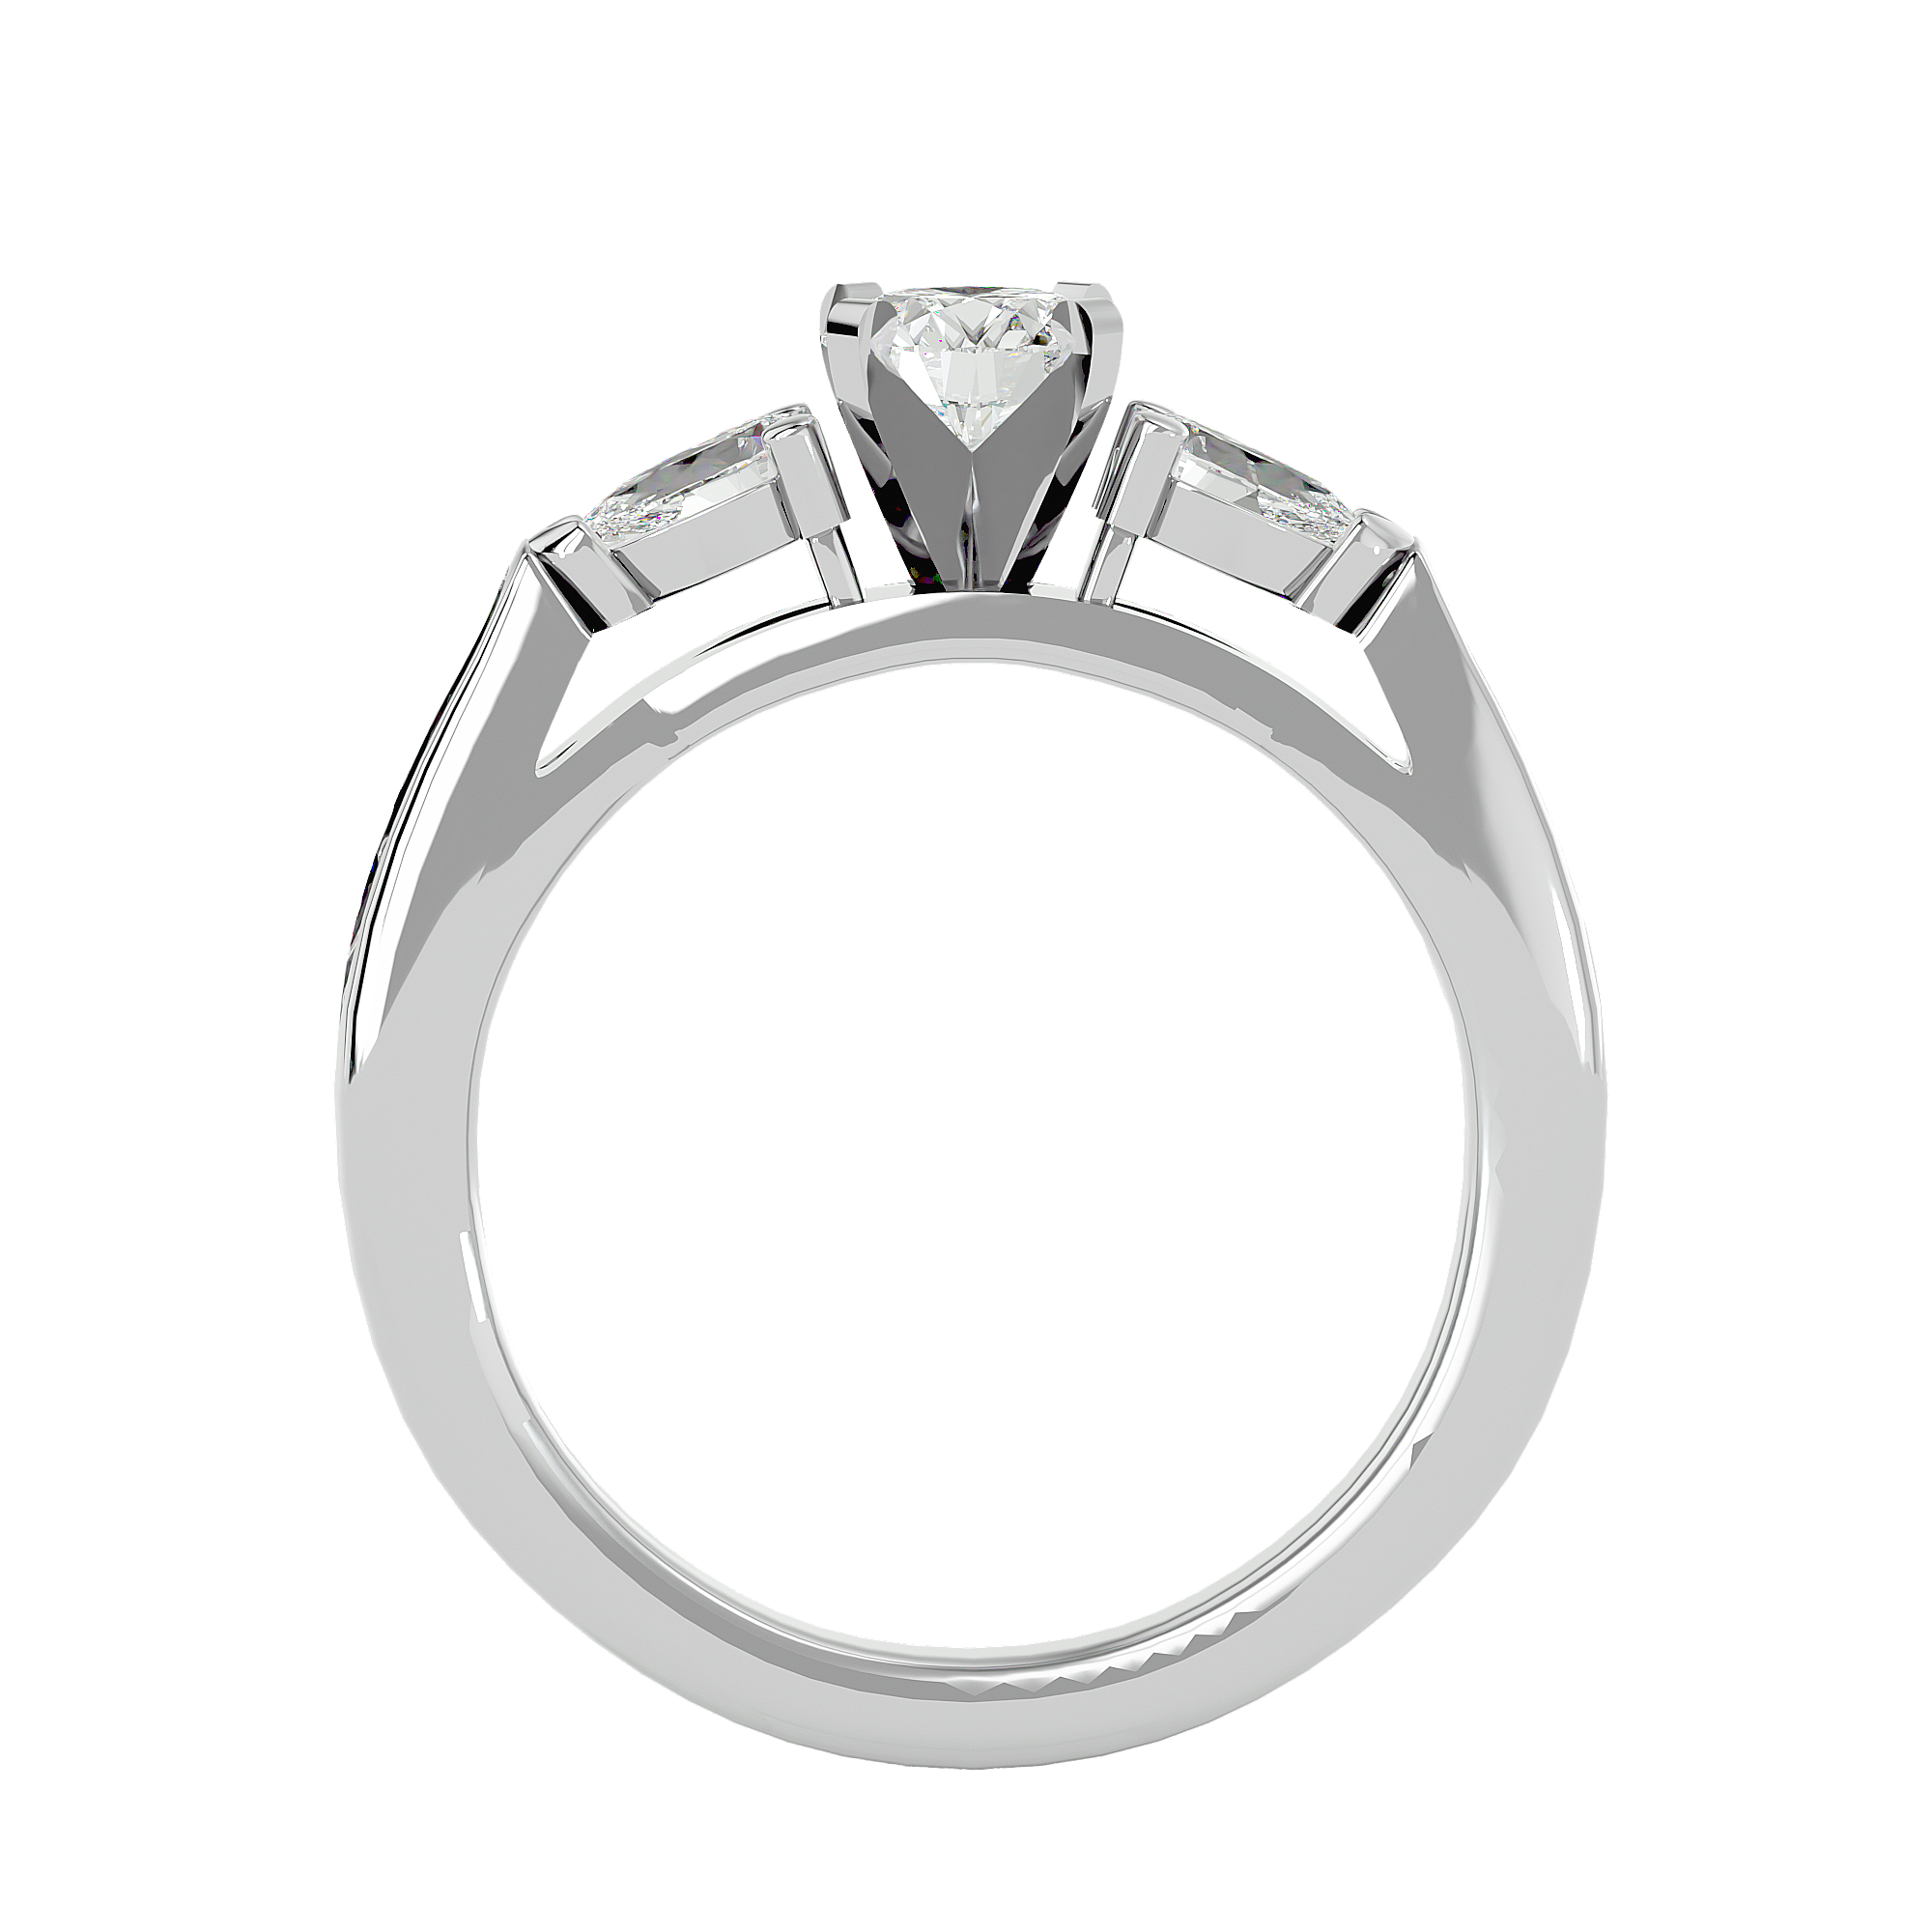 1 1/5 ctw Round With Pear-Shaped Three Stone Lab Grown Diamond Ring